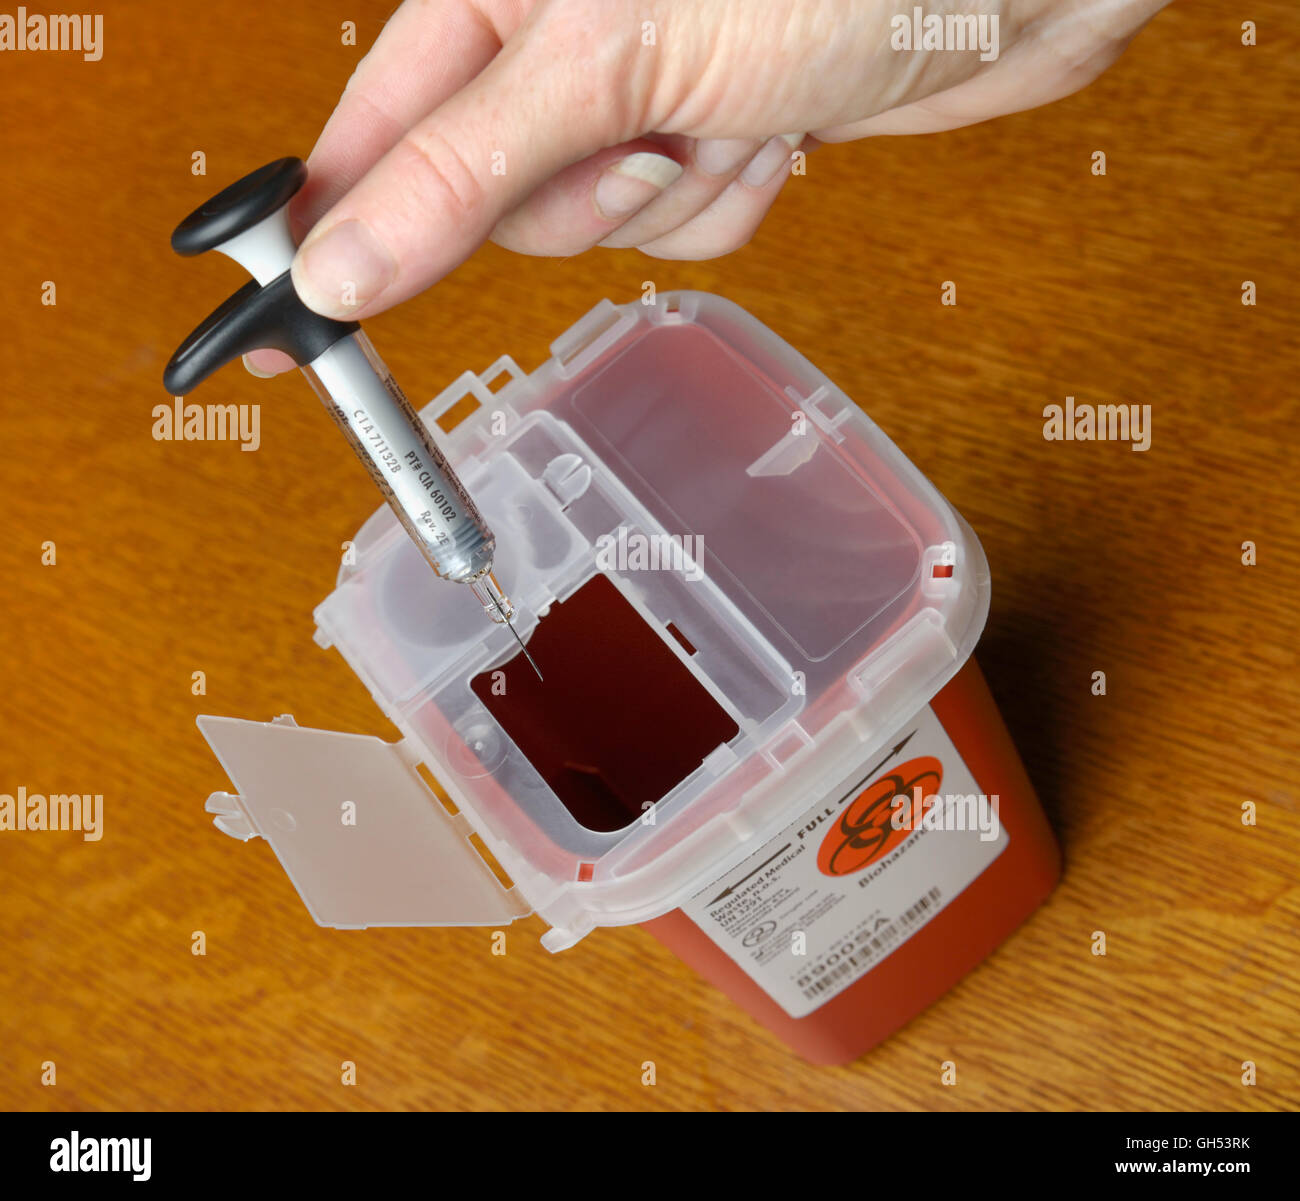 Disposing of a syringe in a sharps container for medical waste after an injection of medicine Stock Photo